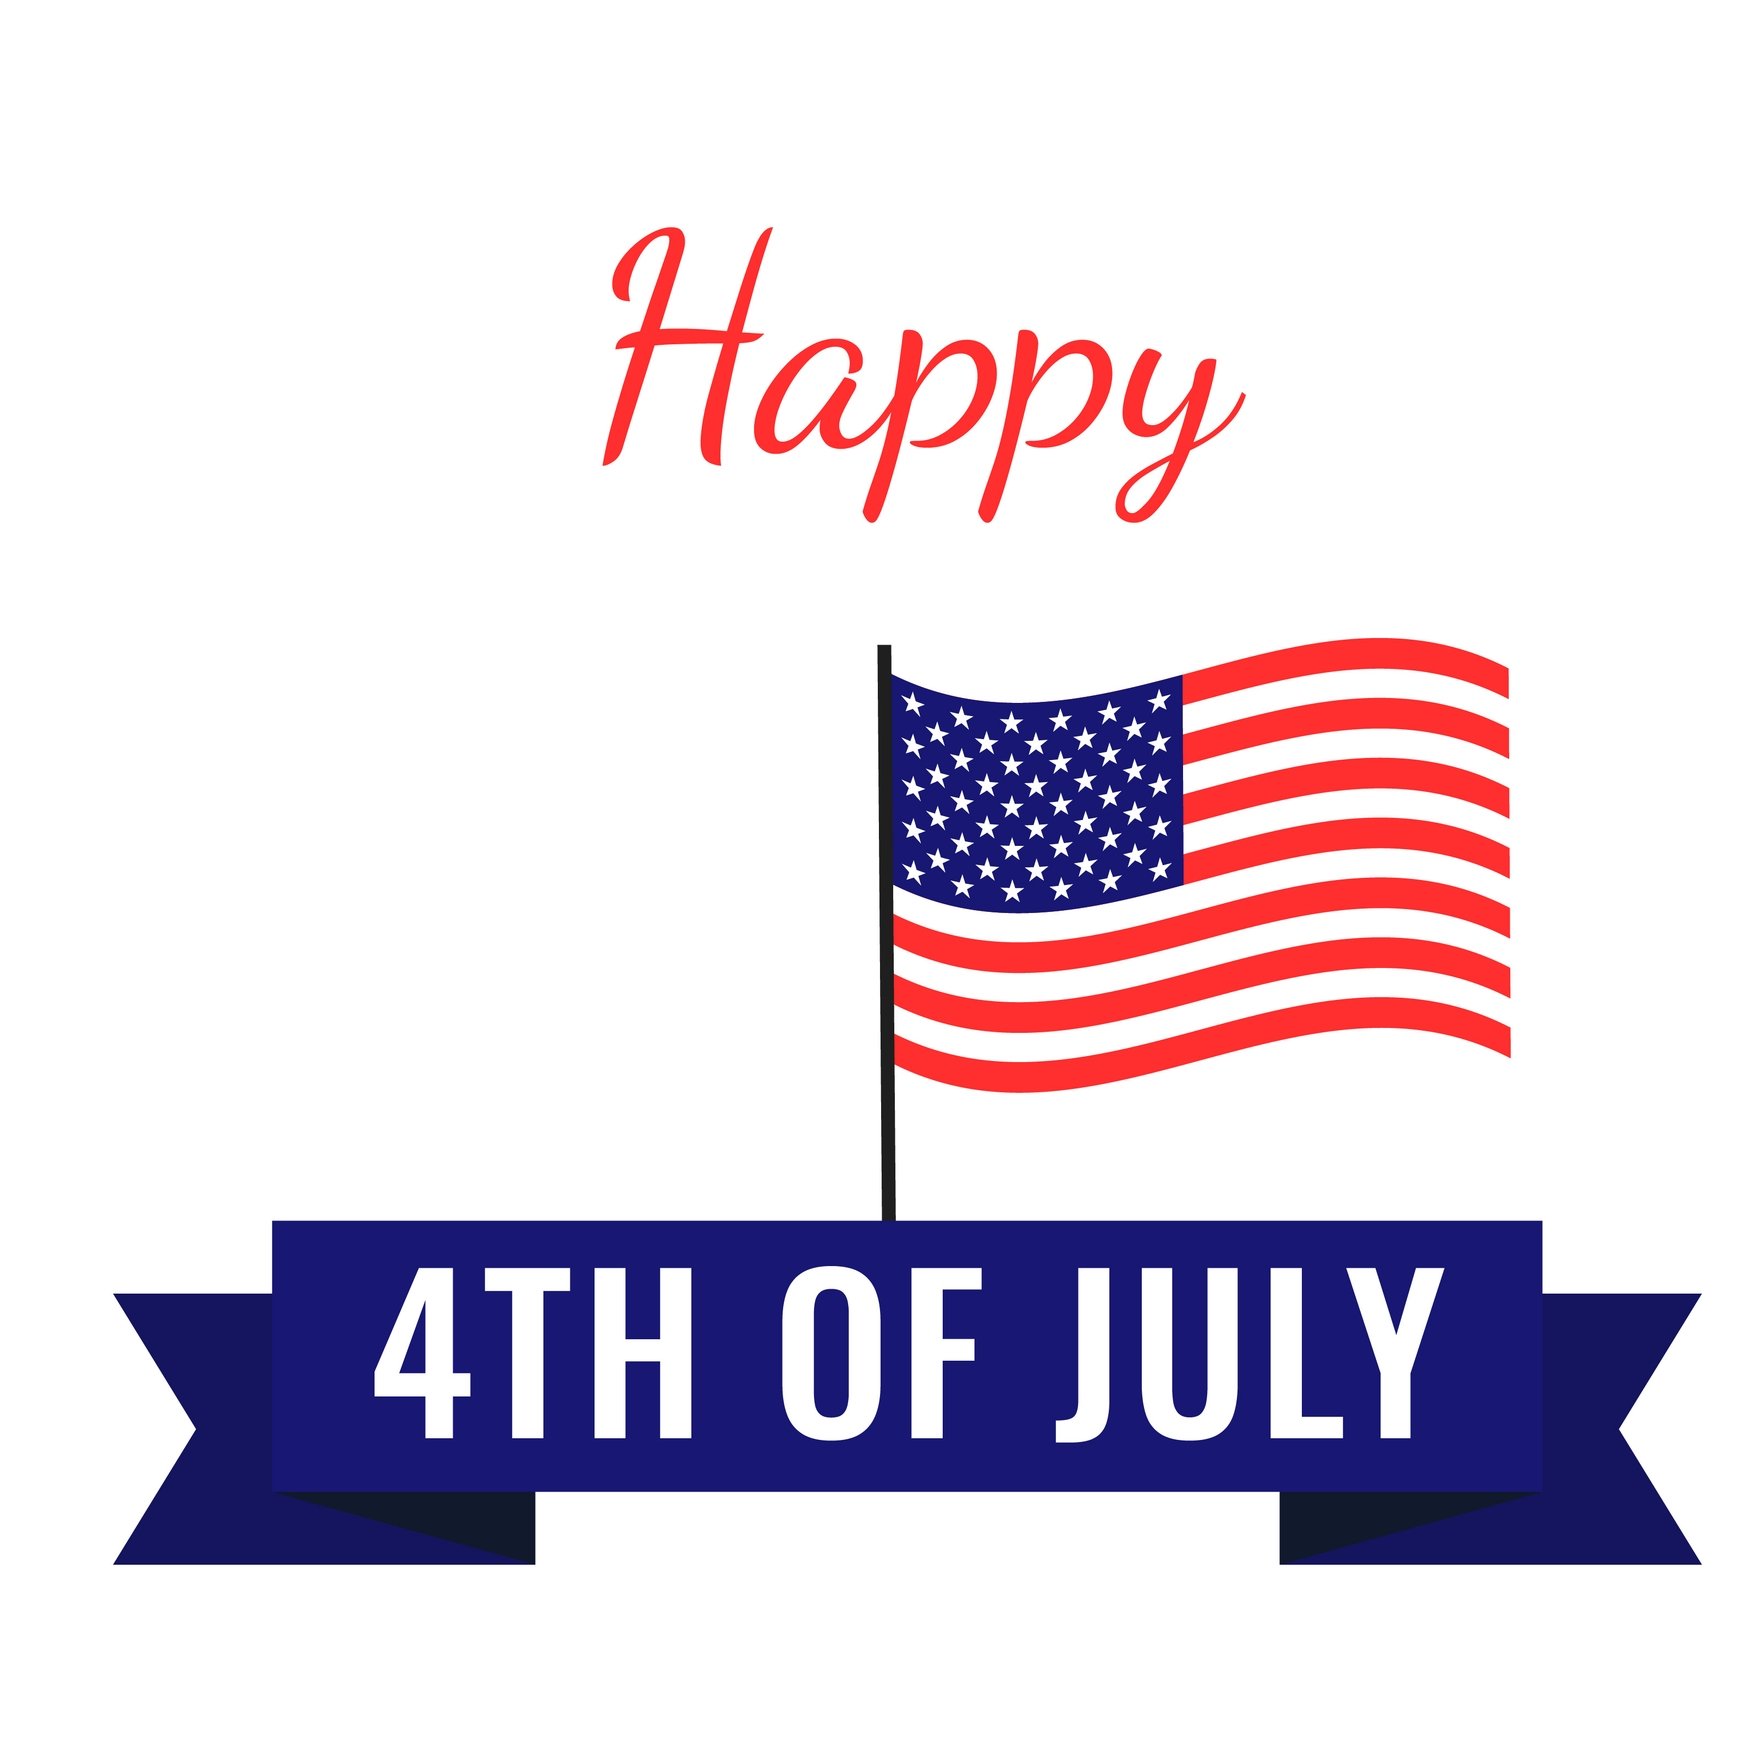 Free 4th Of July Flag Gif in Illustrator, EPS, SVG, JPG, GIF, PNG, After Effects